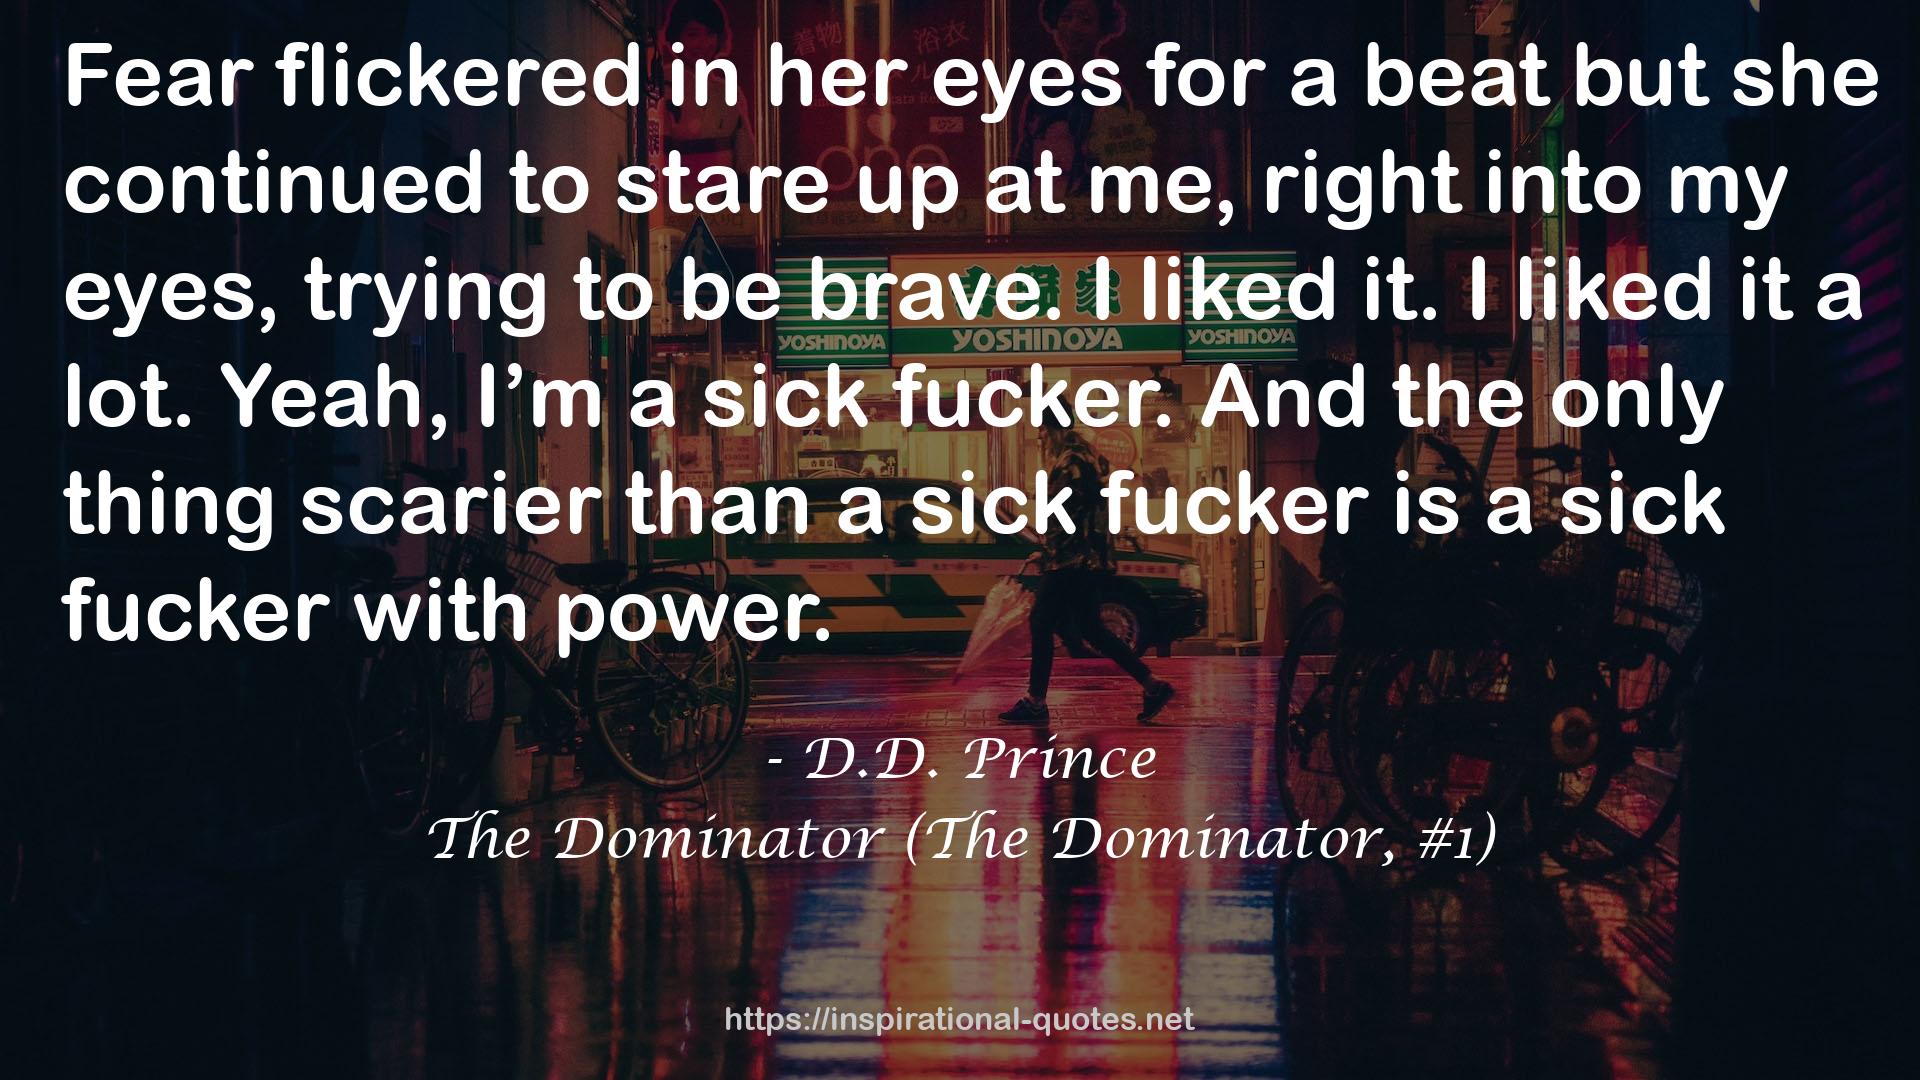 The Dominator (The Dominator, #1) QUOTES